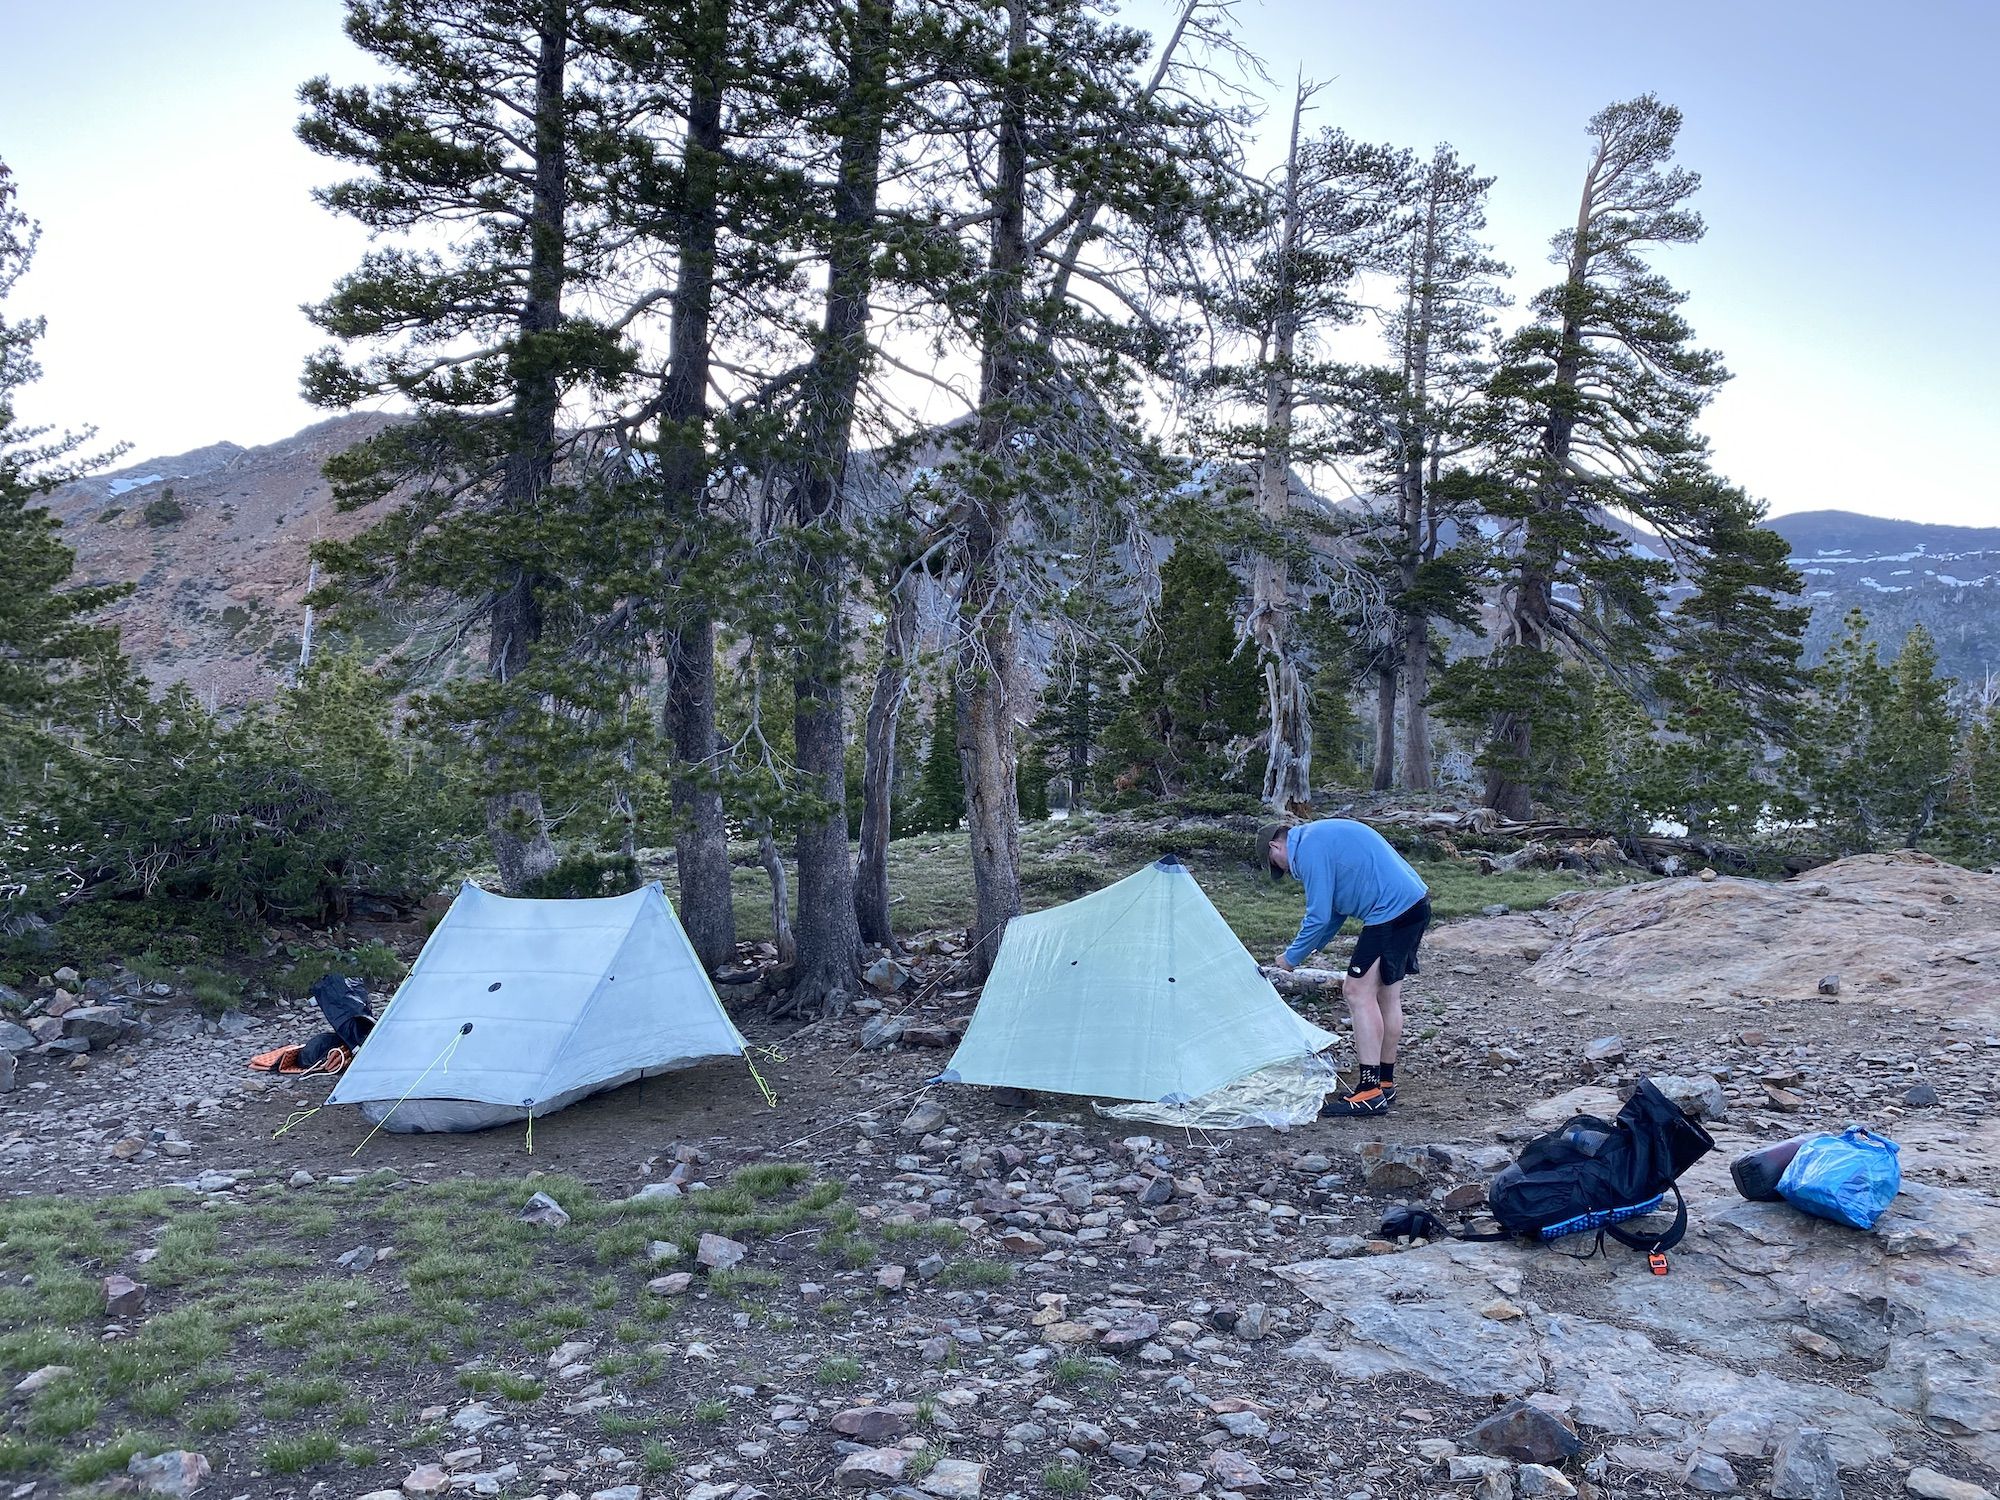 Two tents on rocky ground